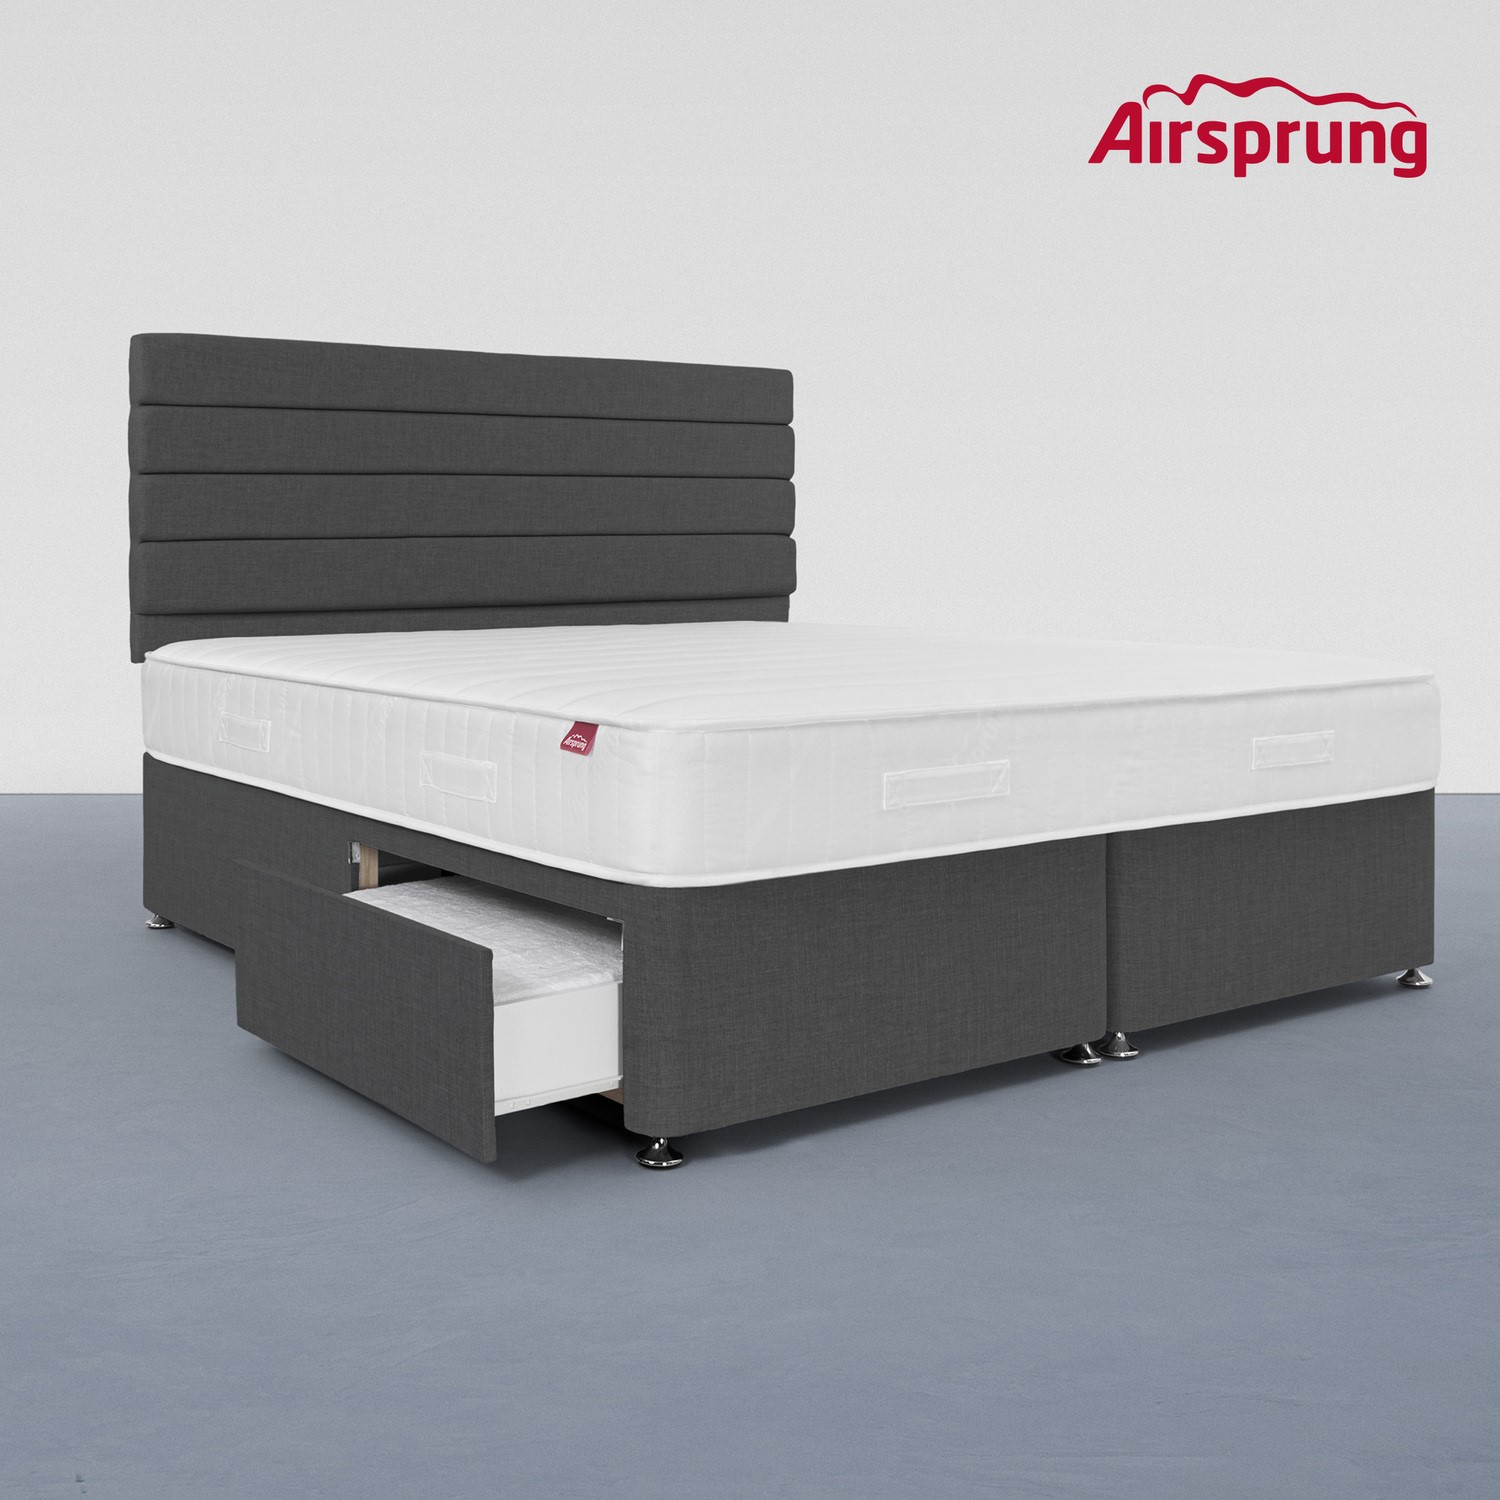 Read more about Airsprung super king 2 drawer divan bed with comfort mattress charcoal